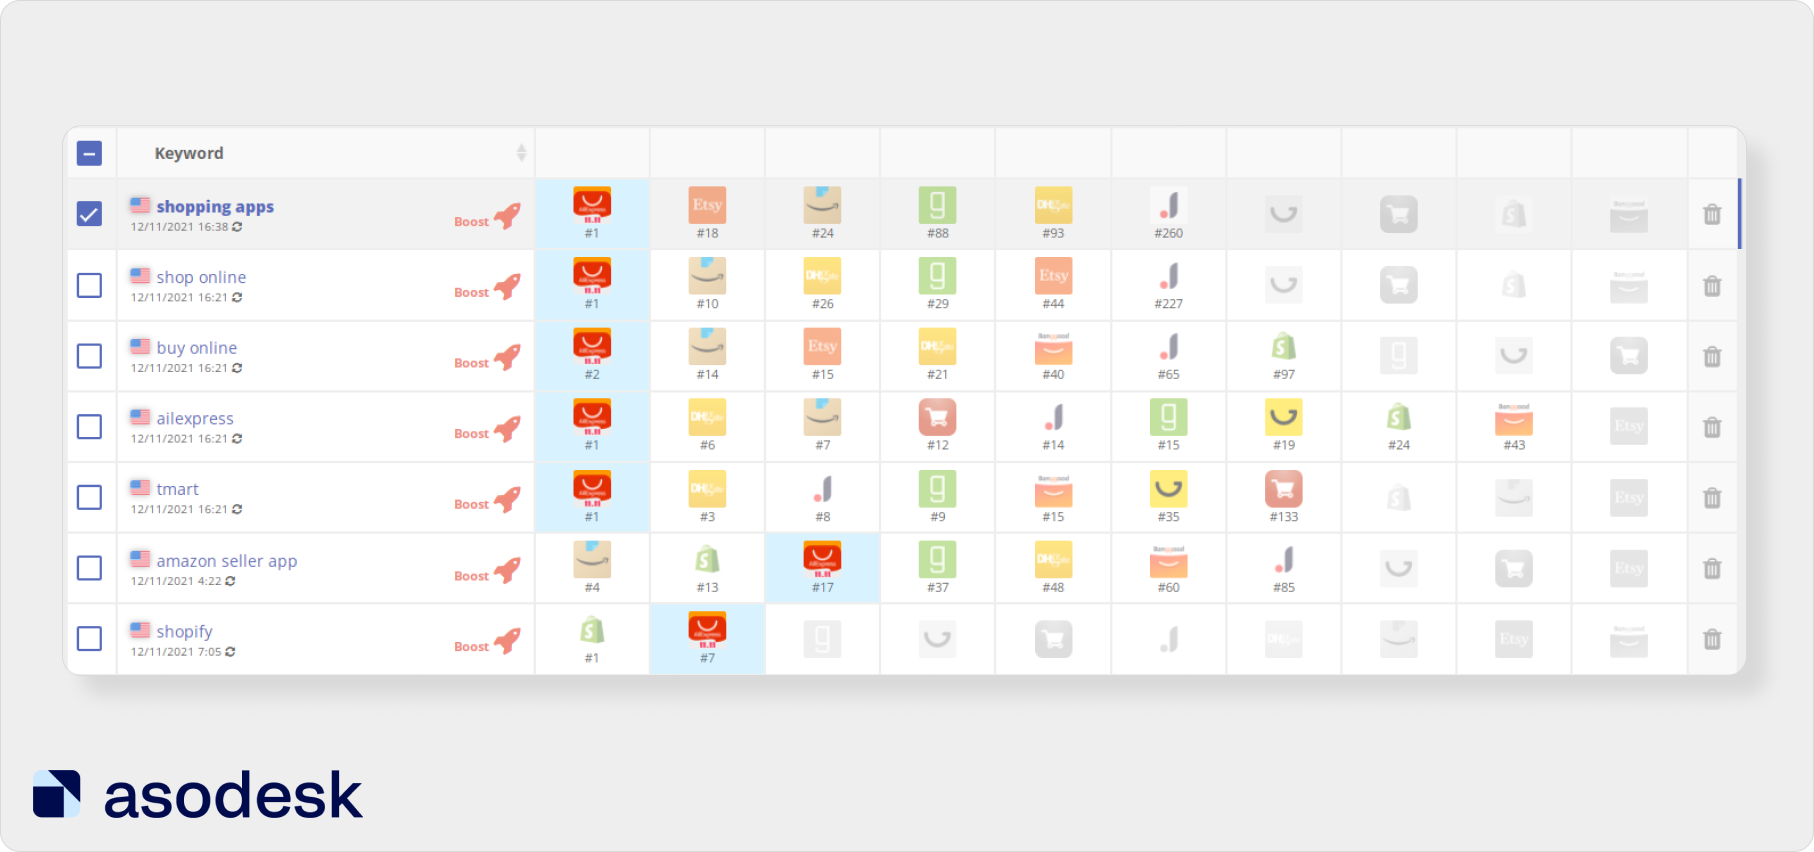 The competitors tool in Asodesk shows all competitor icons on one table